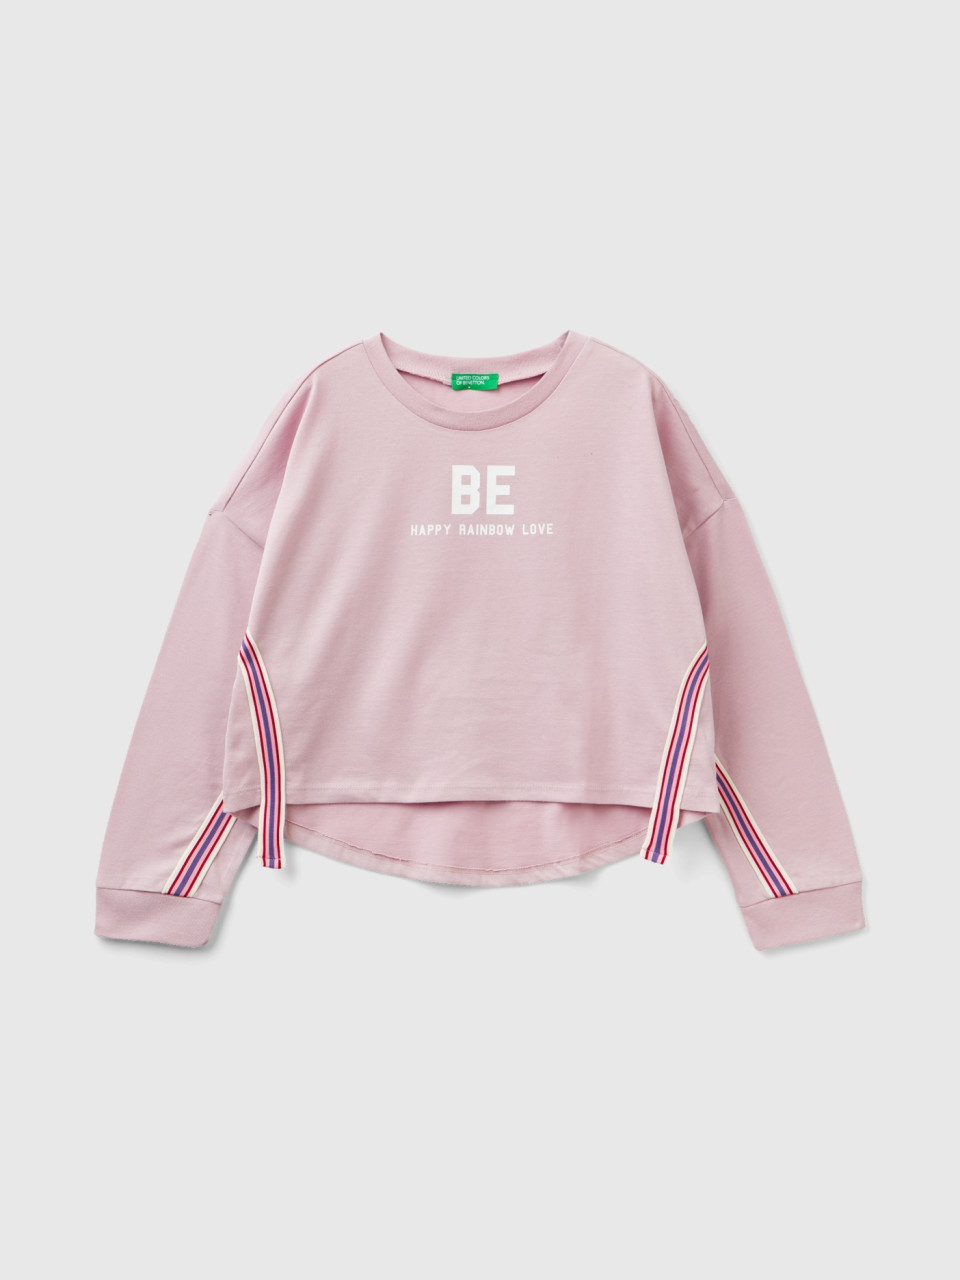 Benetton, Warm T-shirt With be Print, Pink, Kids